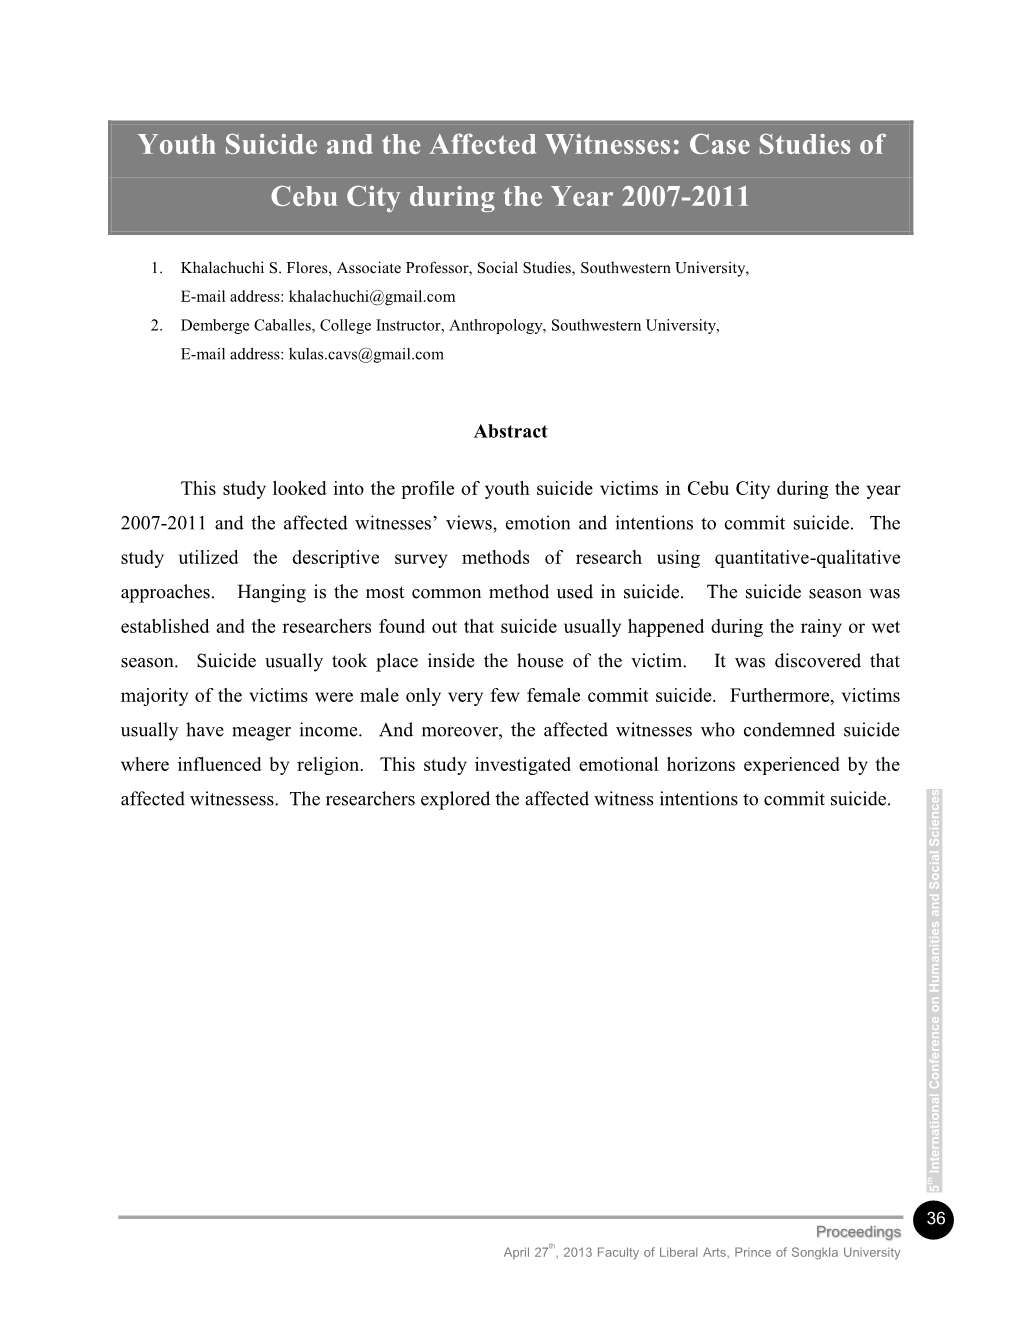 Youth Suicide and the Affected Witnesses: Case Studies of Cebu City During the Year 2007-2011